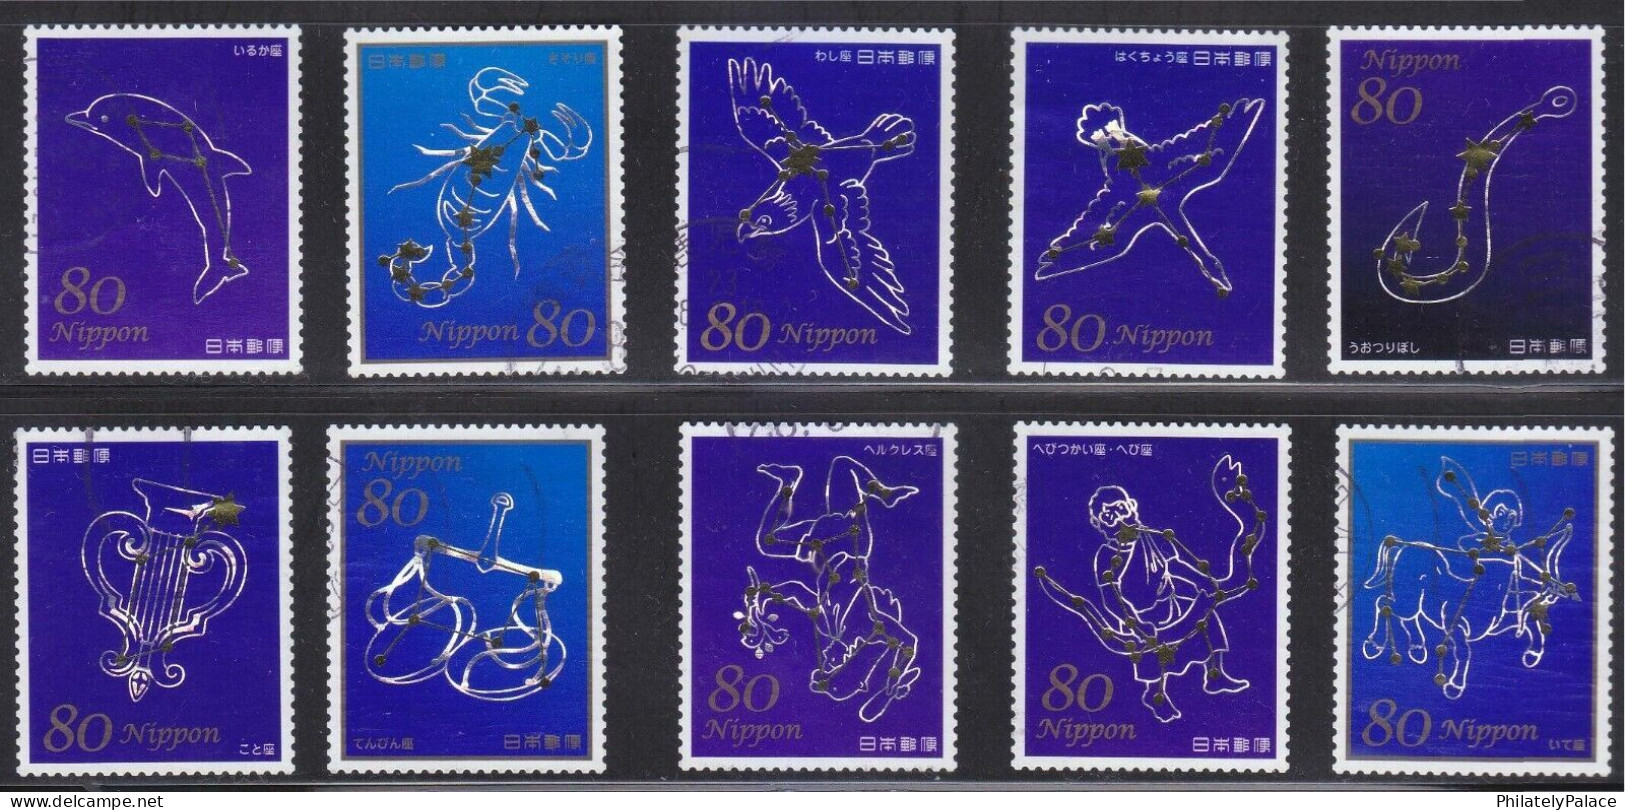 JAPAN 2011 CONSTELLATION SERIES 1 , ASTRONOMY,  COMP. SET OF 10 STAMPS IN FINE USED CONDITION (**) - Used Stamps